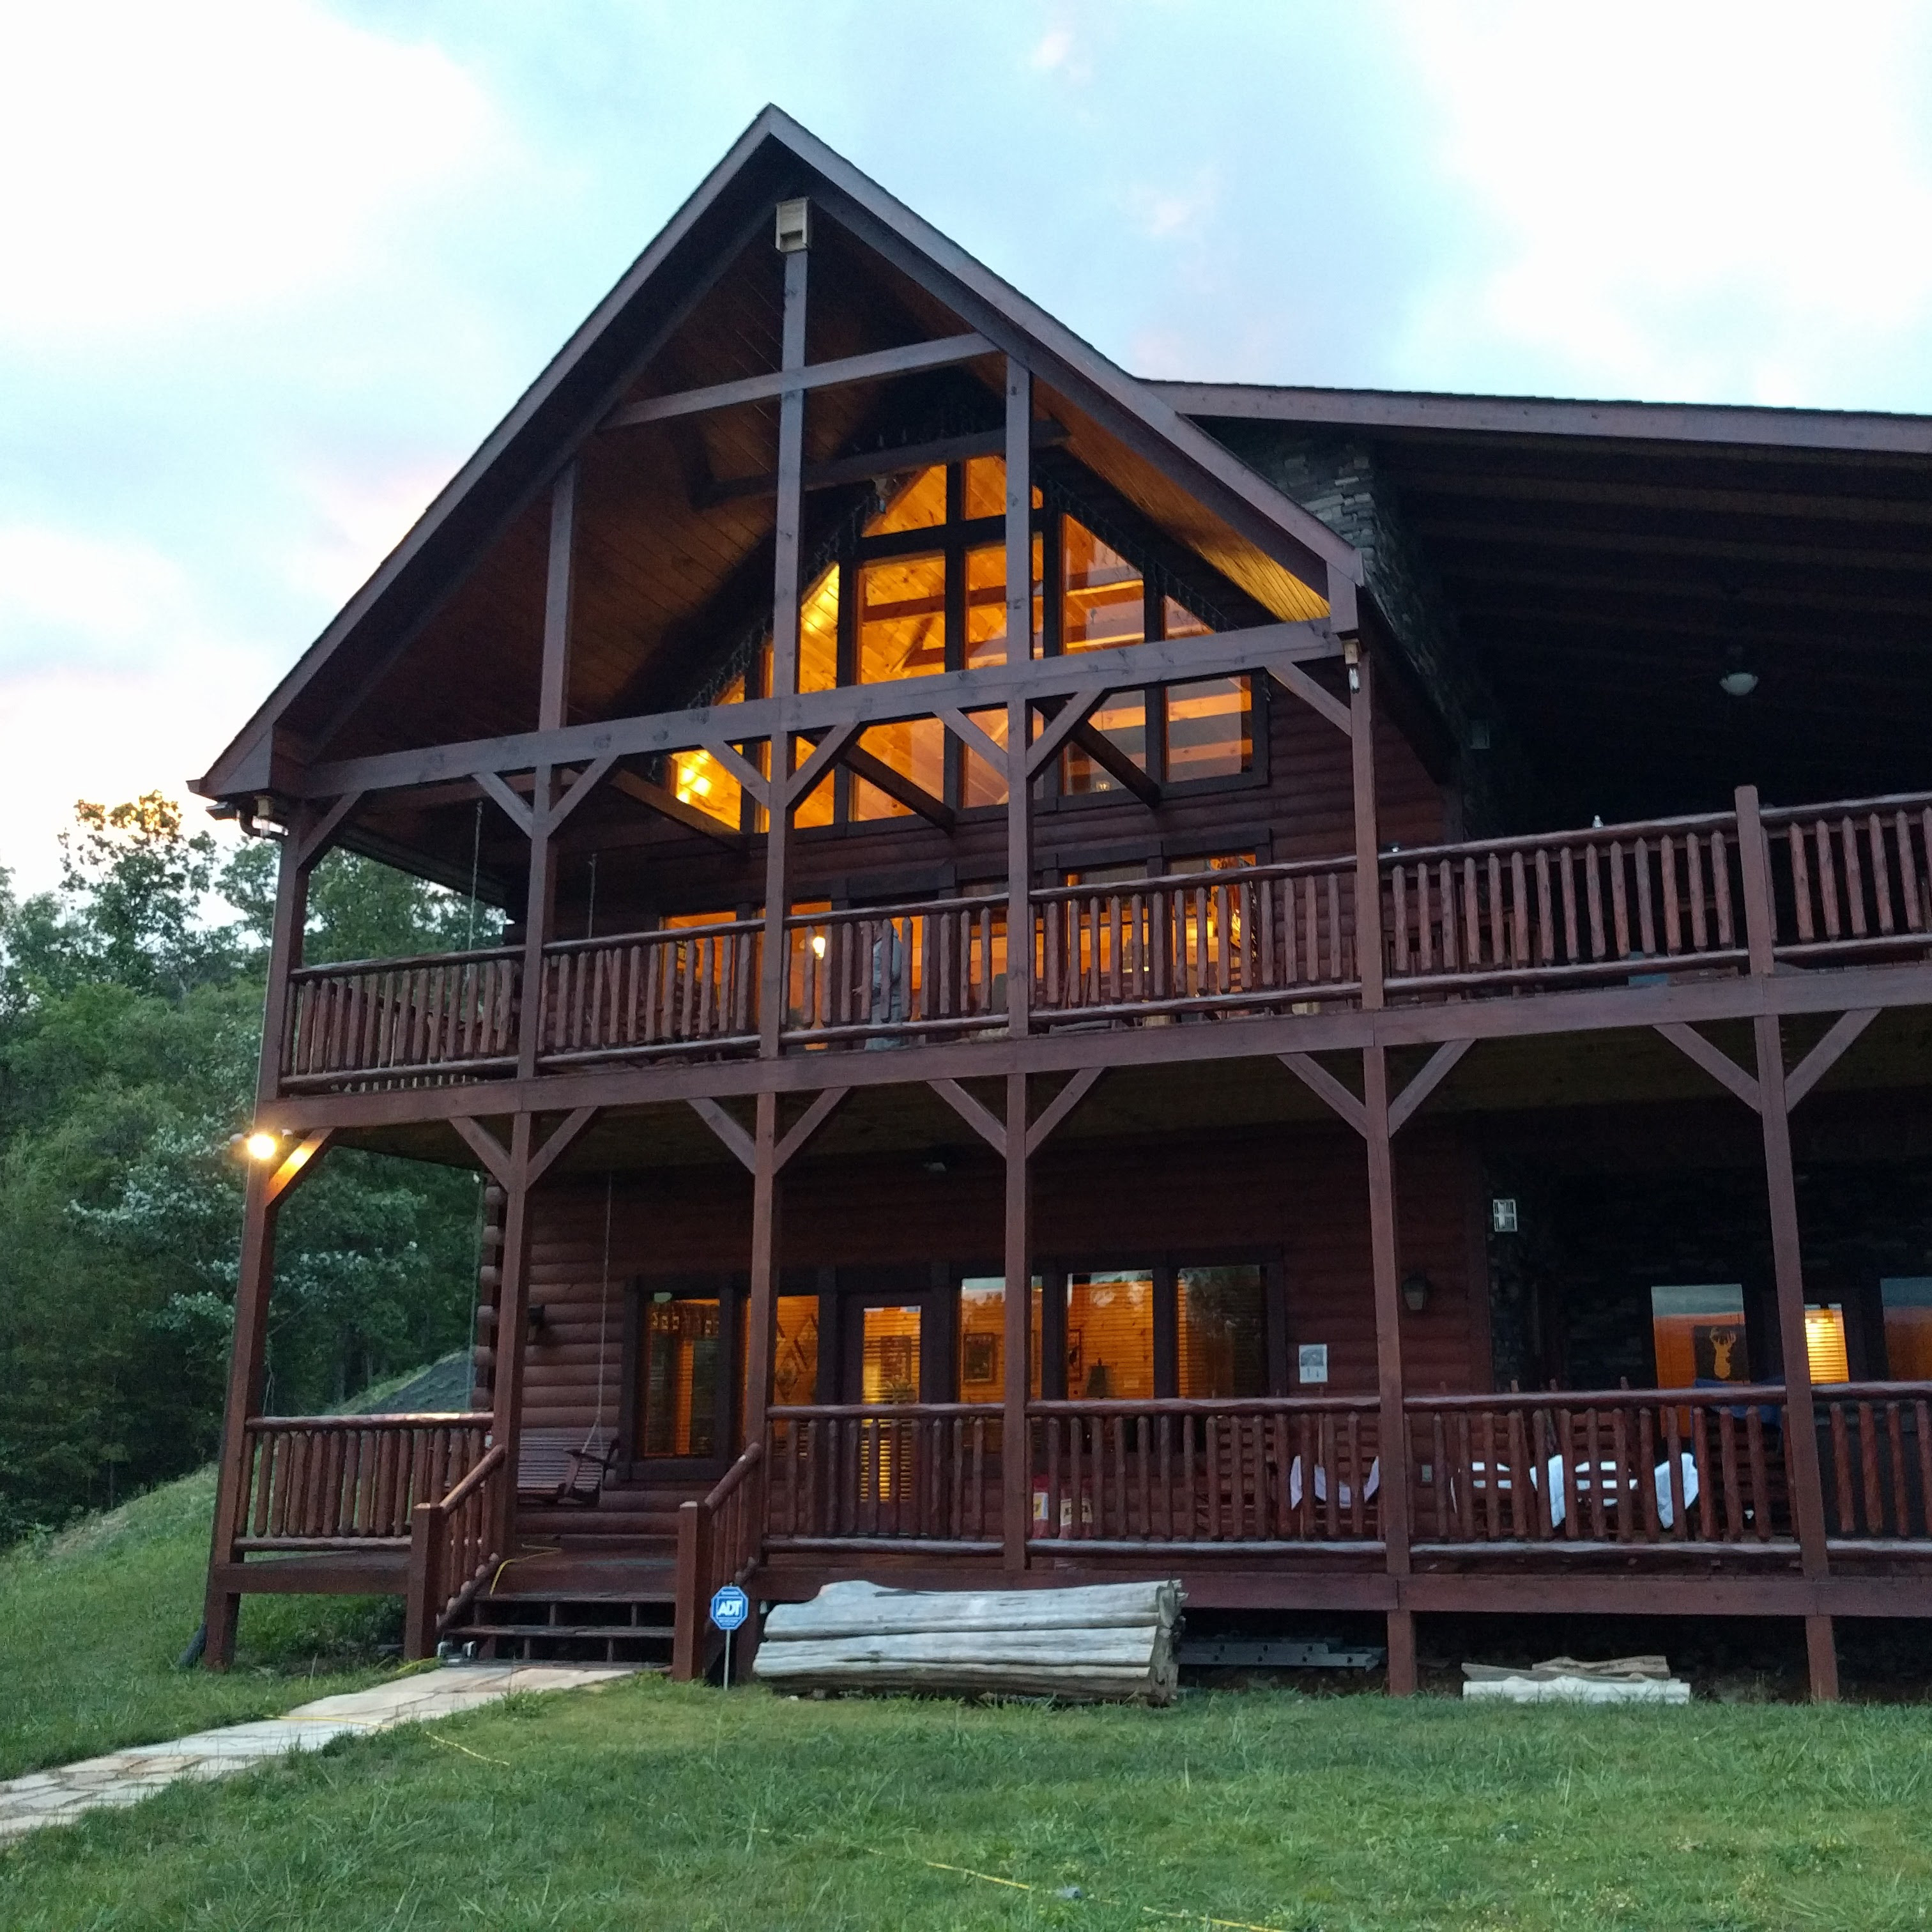 The cabins in the Smokey Mountains, Tennessee are magnificent 2019